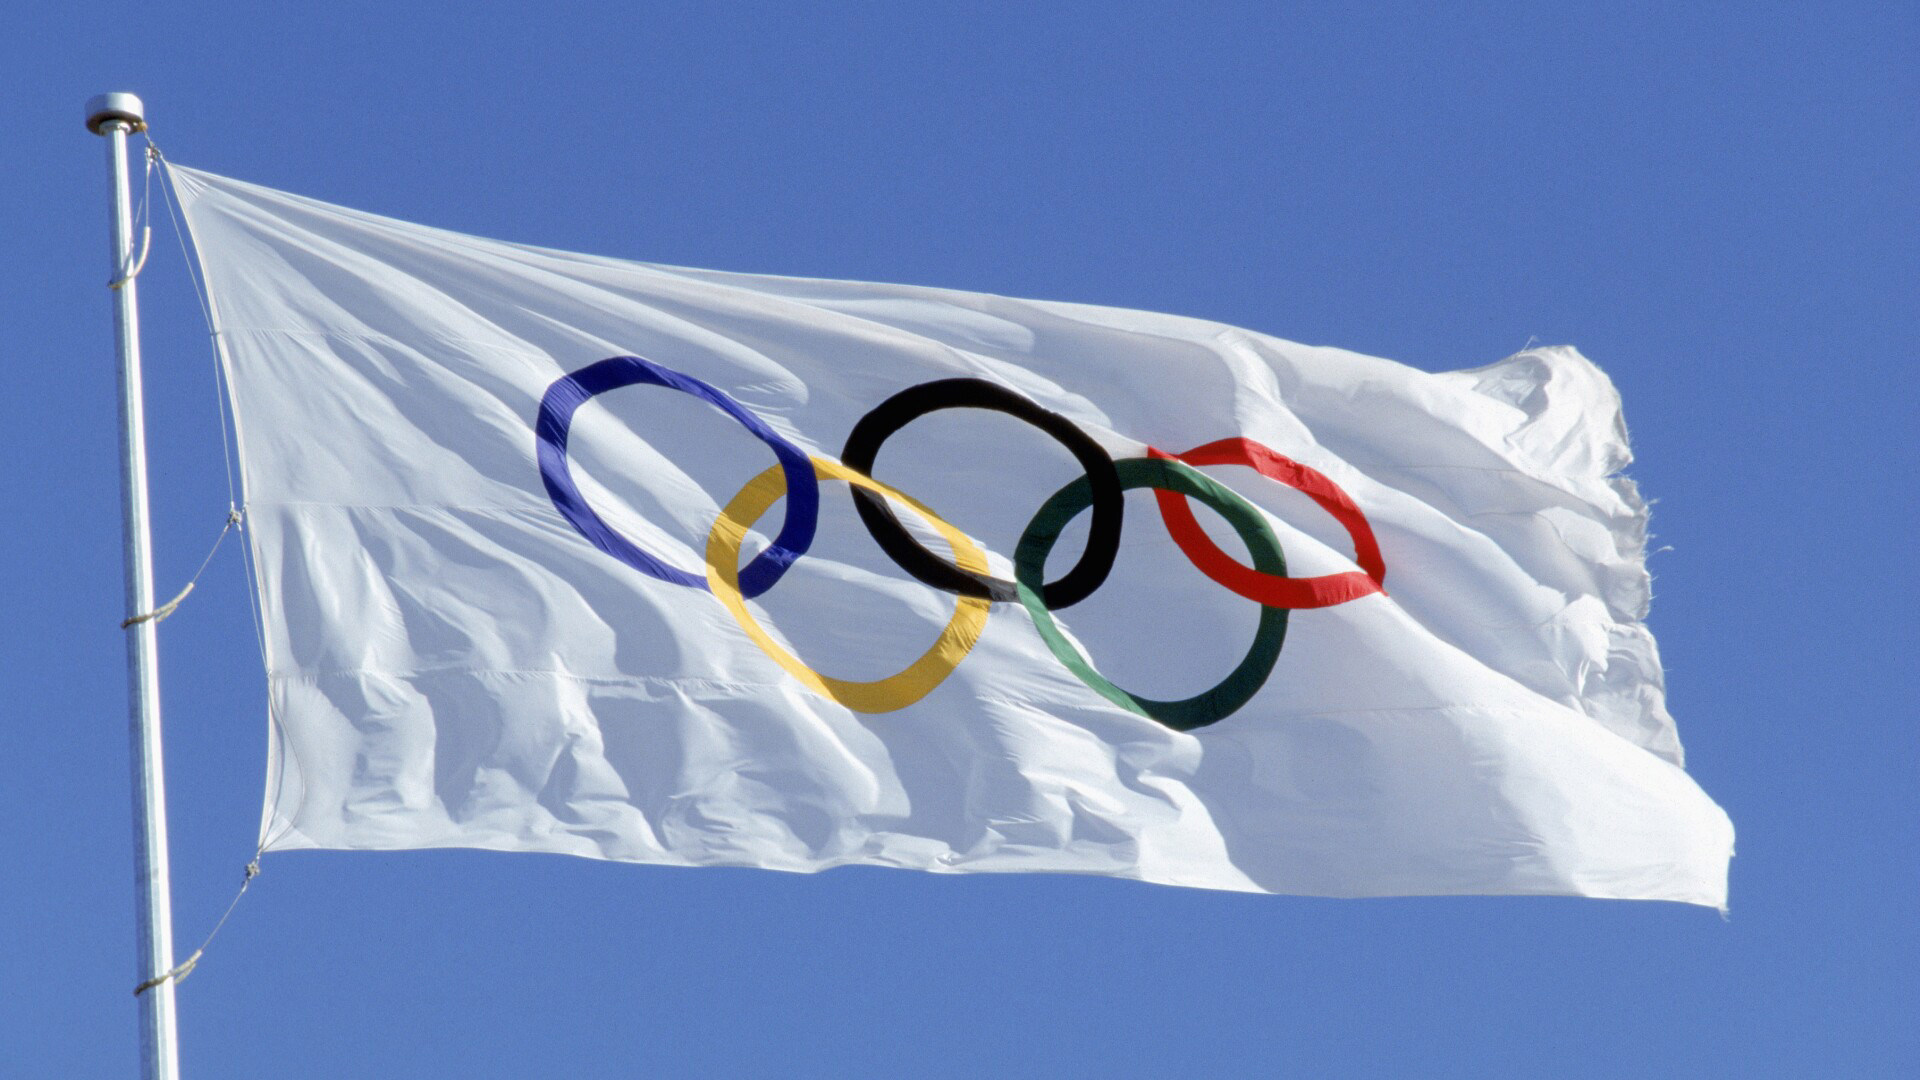 IOC considers double award of 2030, 2034 Winter Olympic hosts in 2024